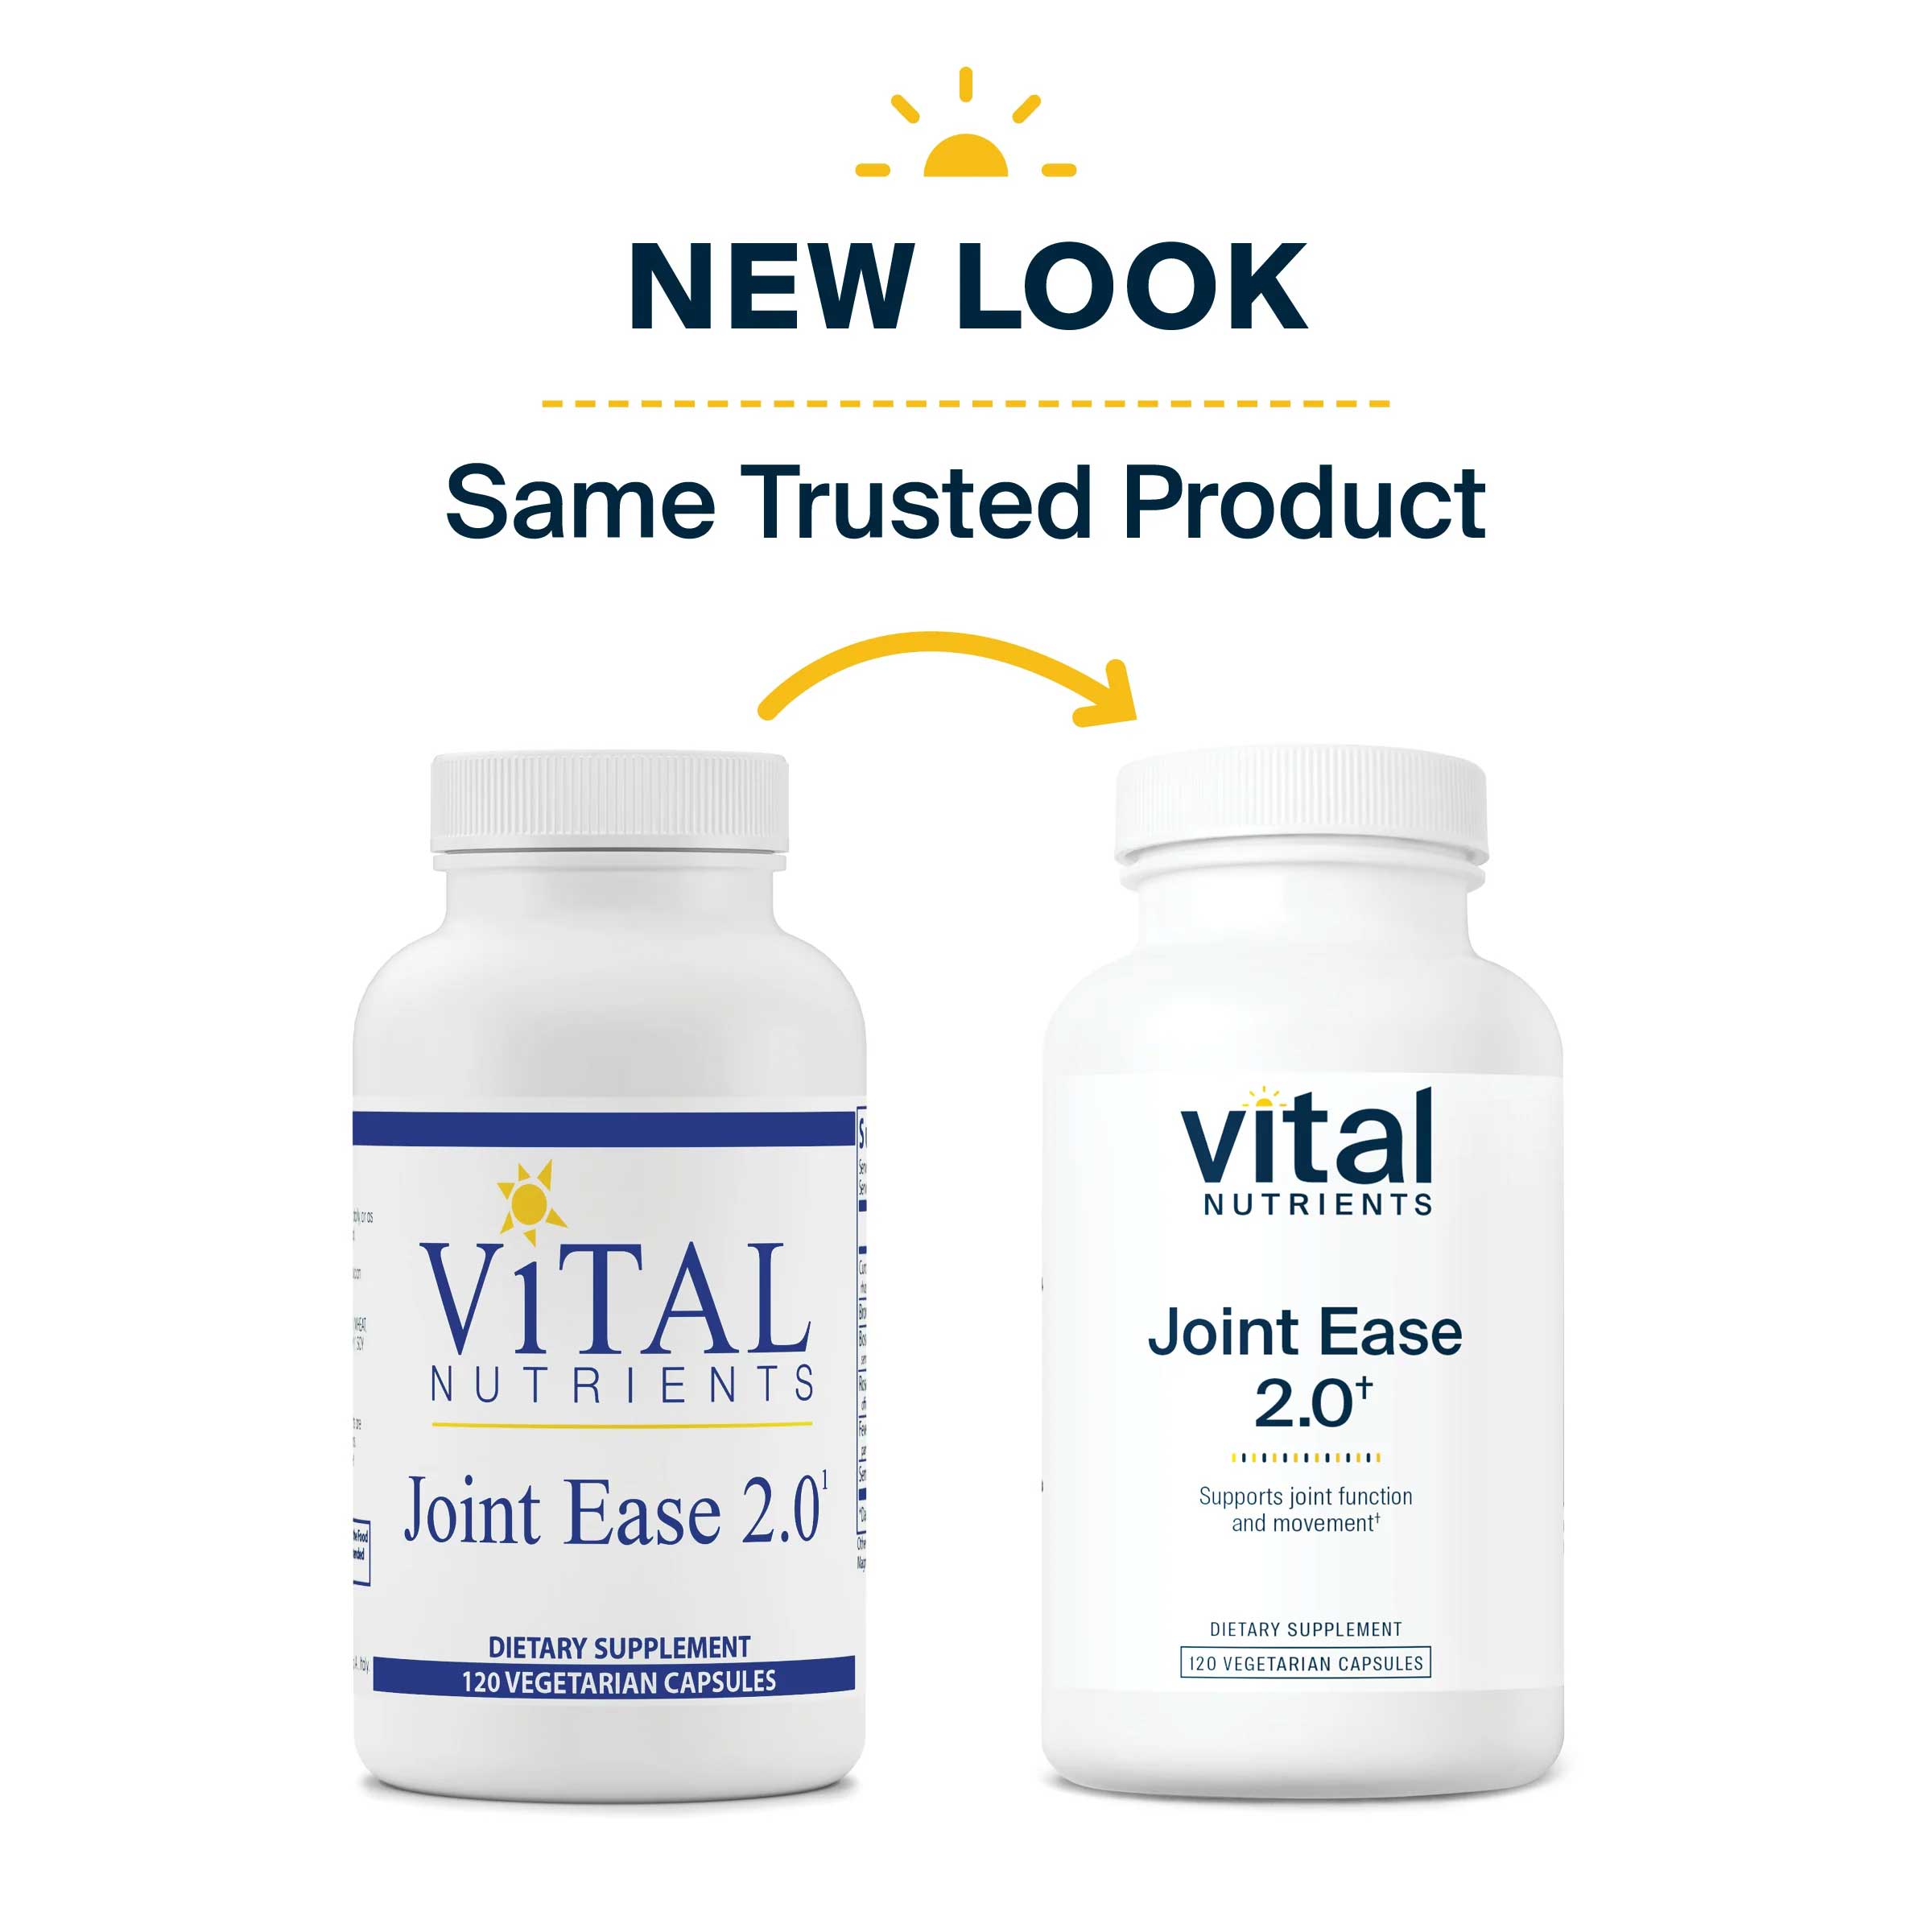 Vital Nutrients Joint Ease 2.0 New Look